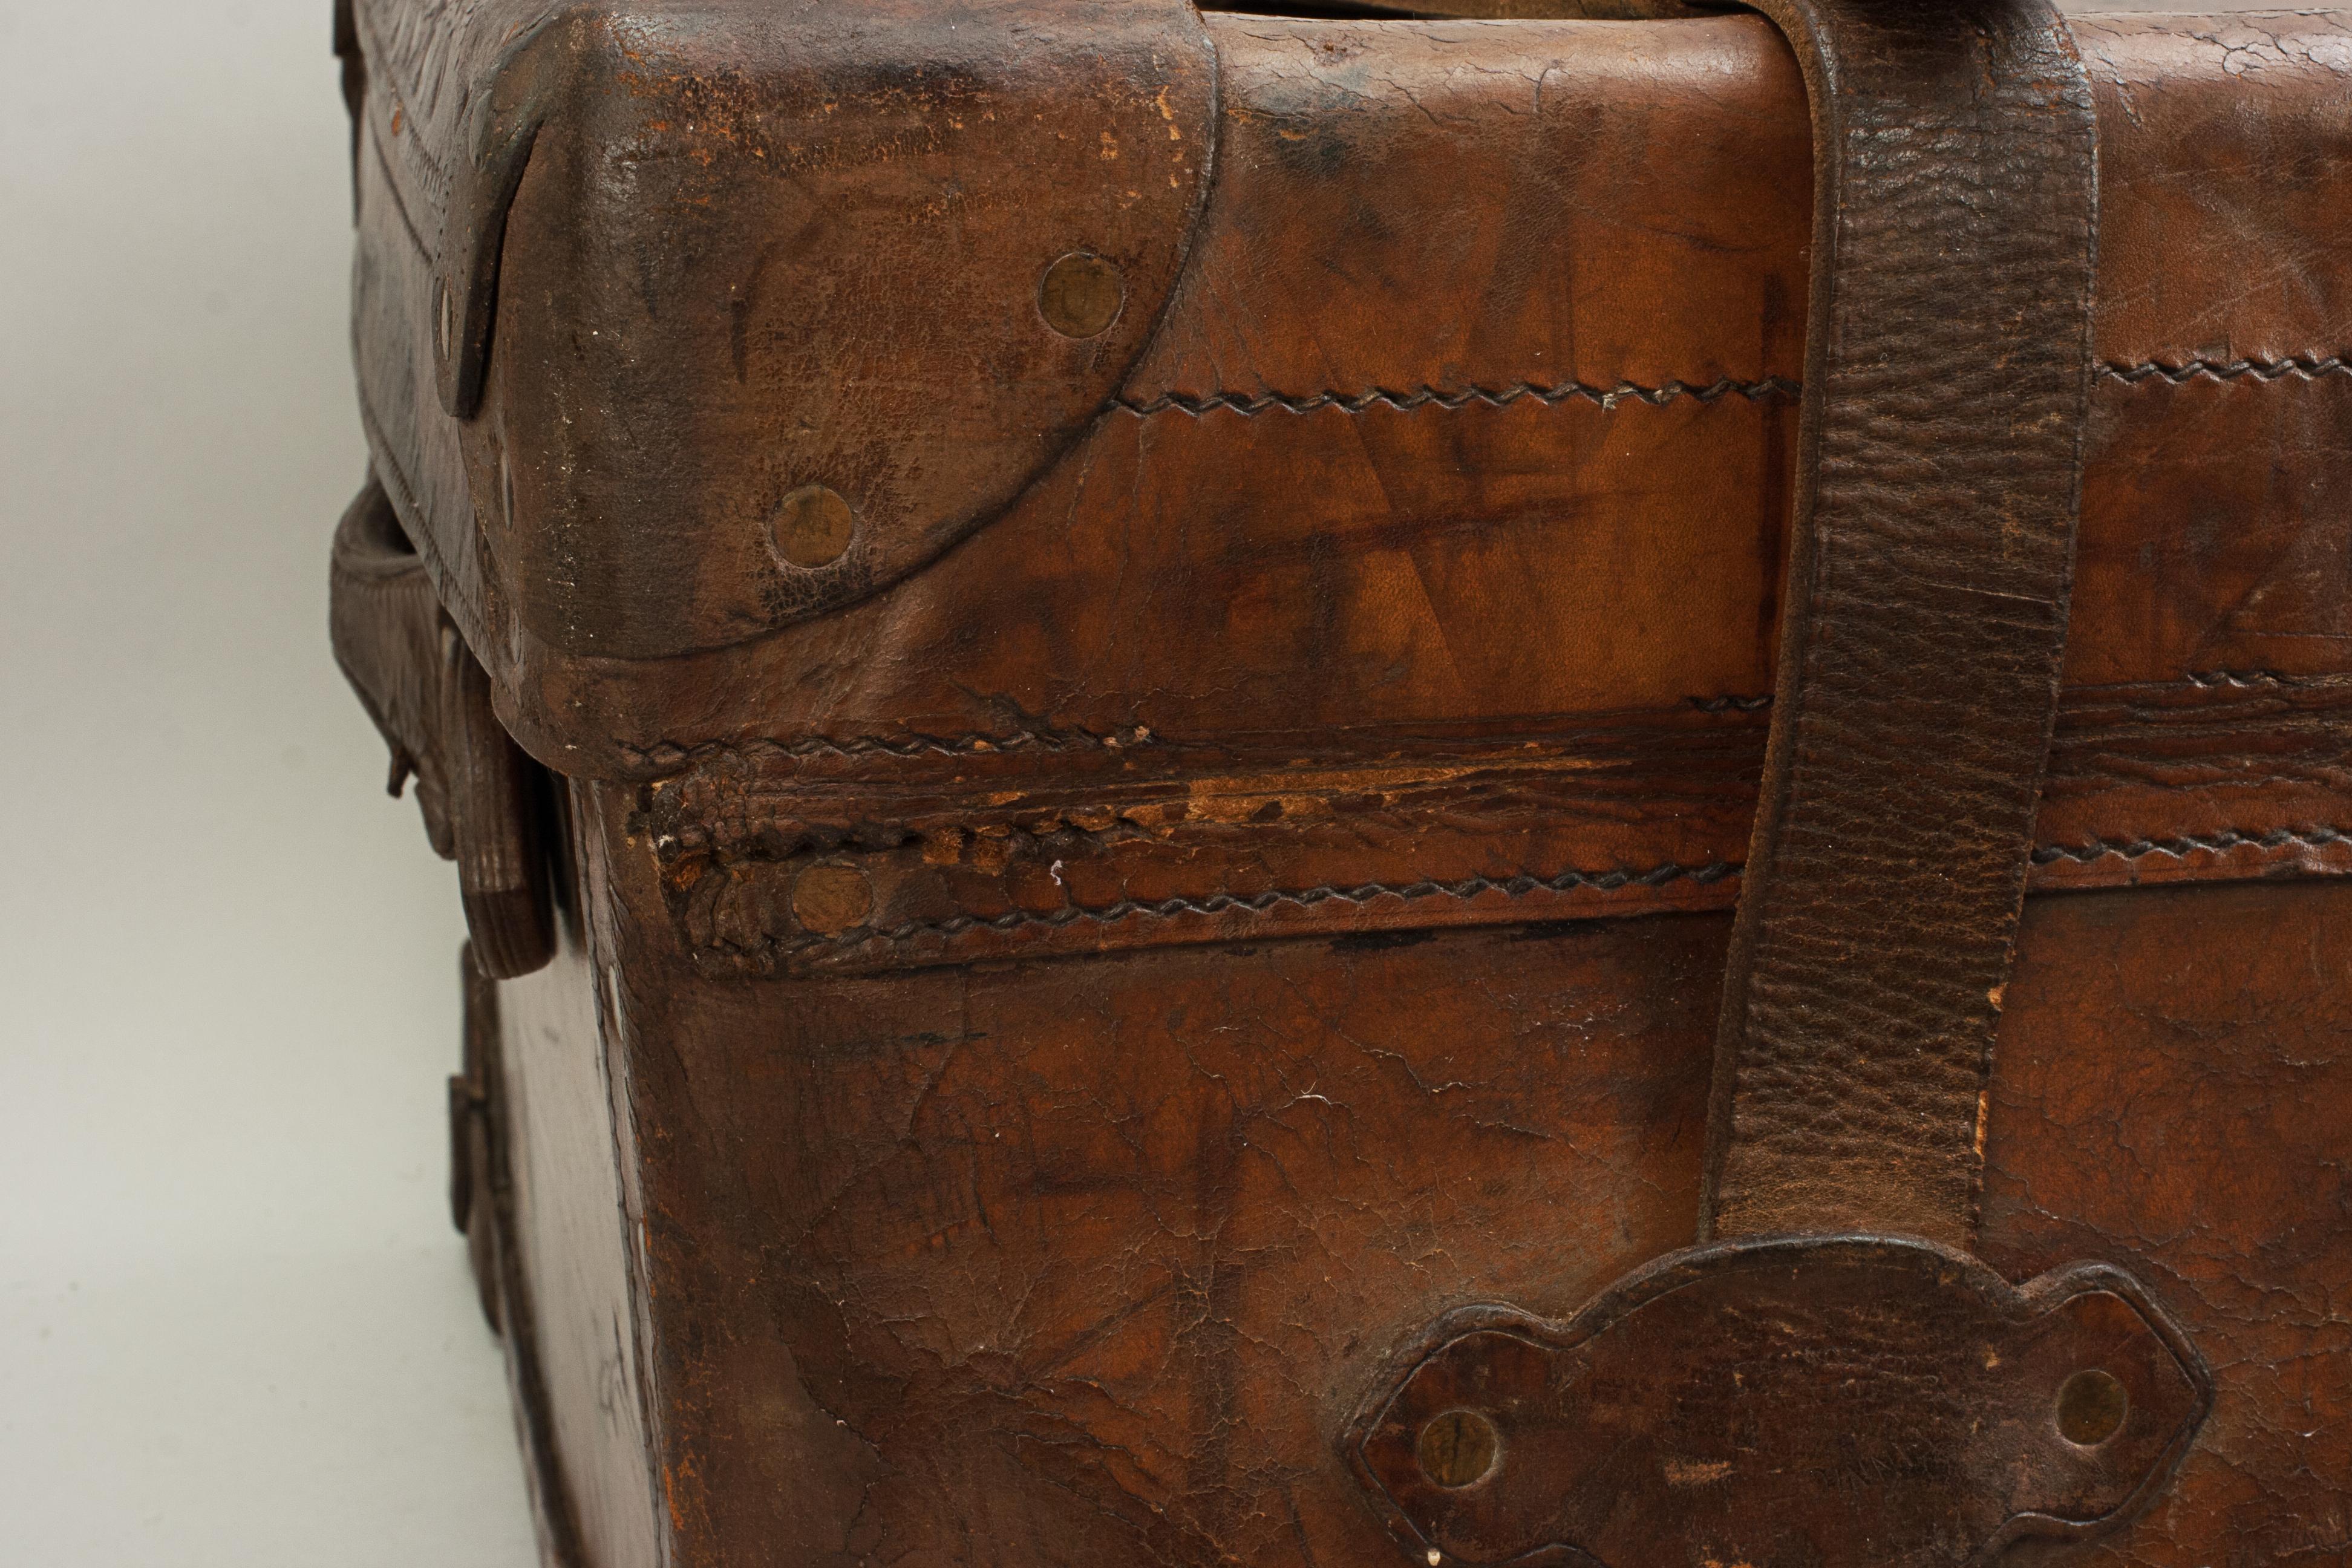 Antique Leather Trunk by Finnigans, Bond Street, London Luggage 7